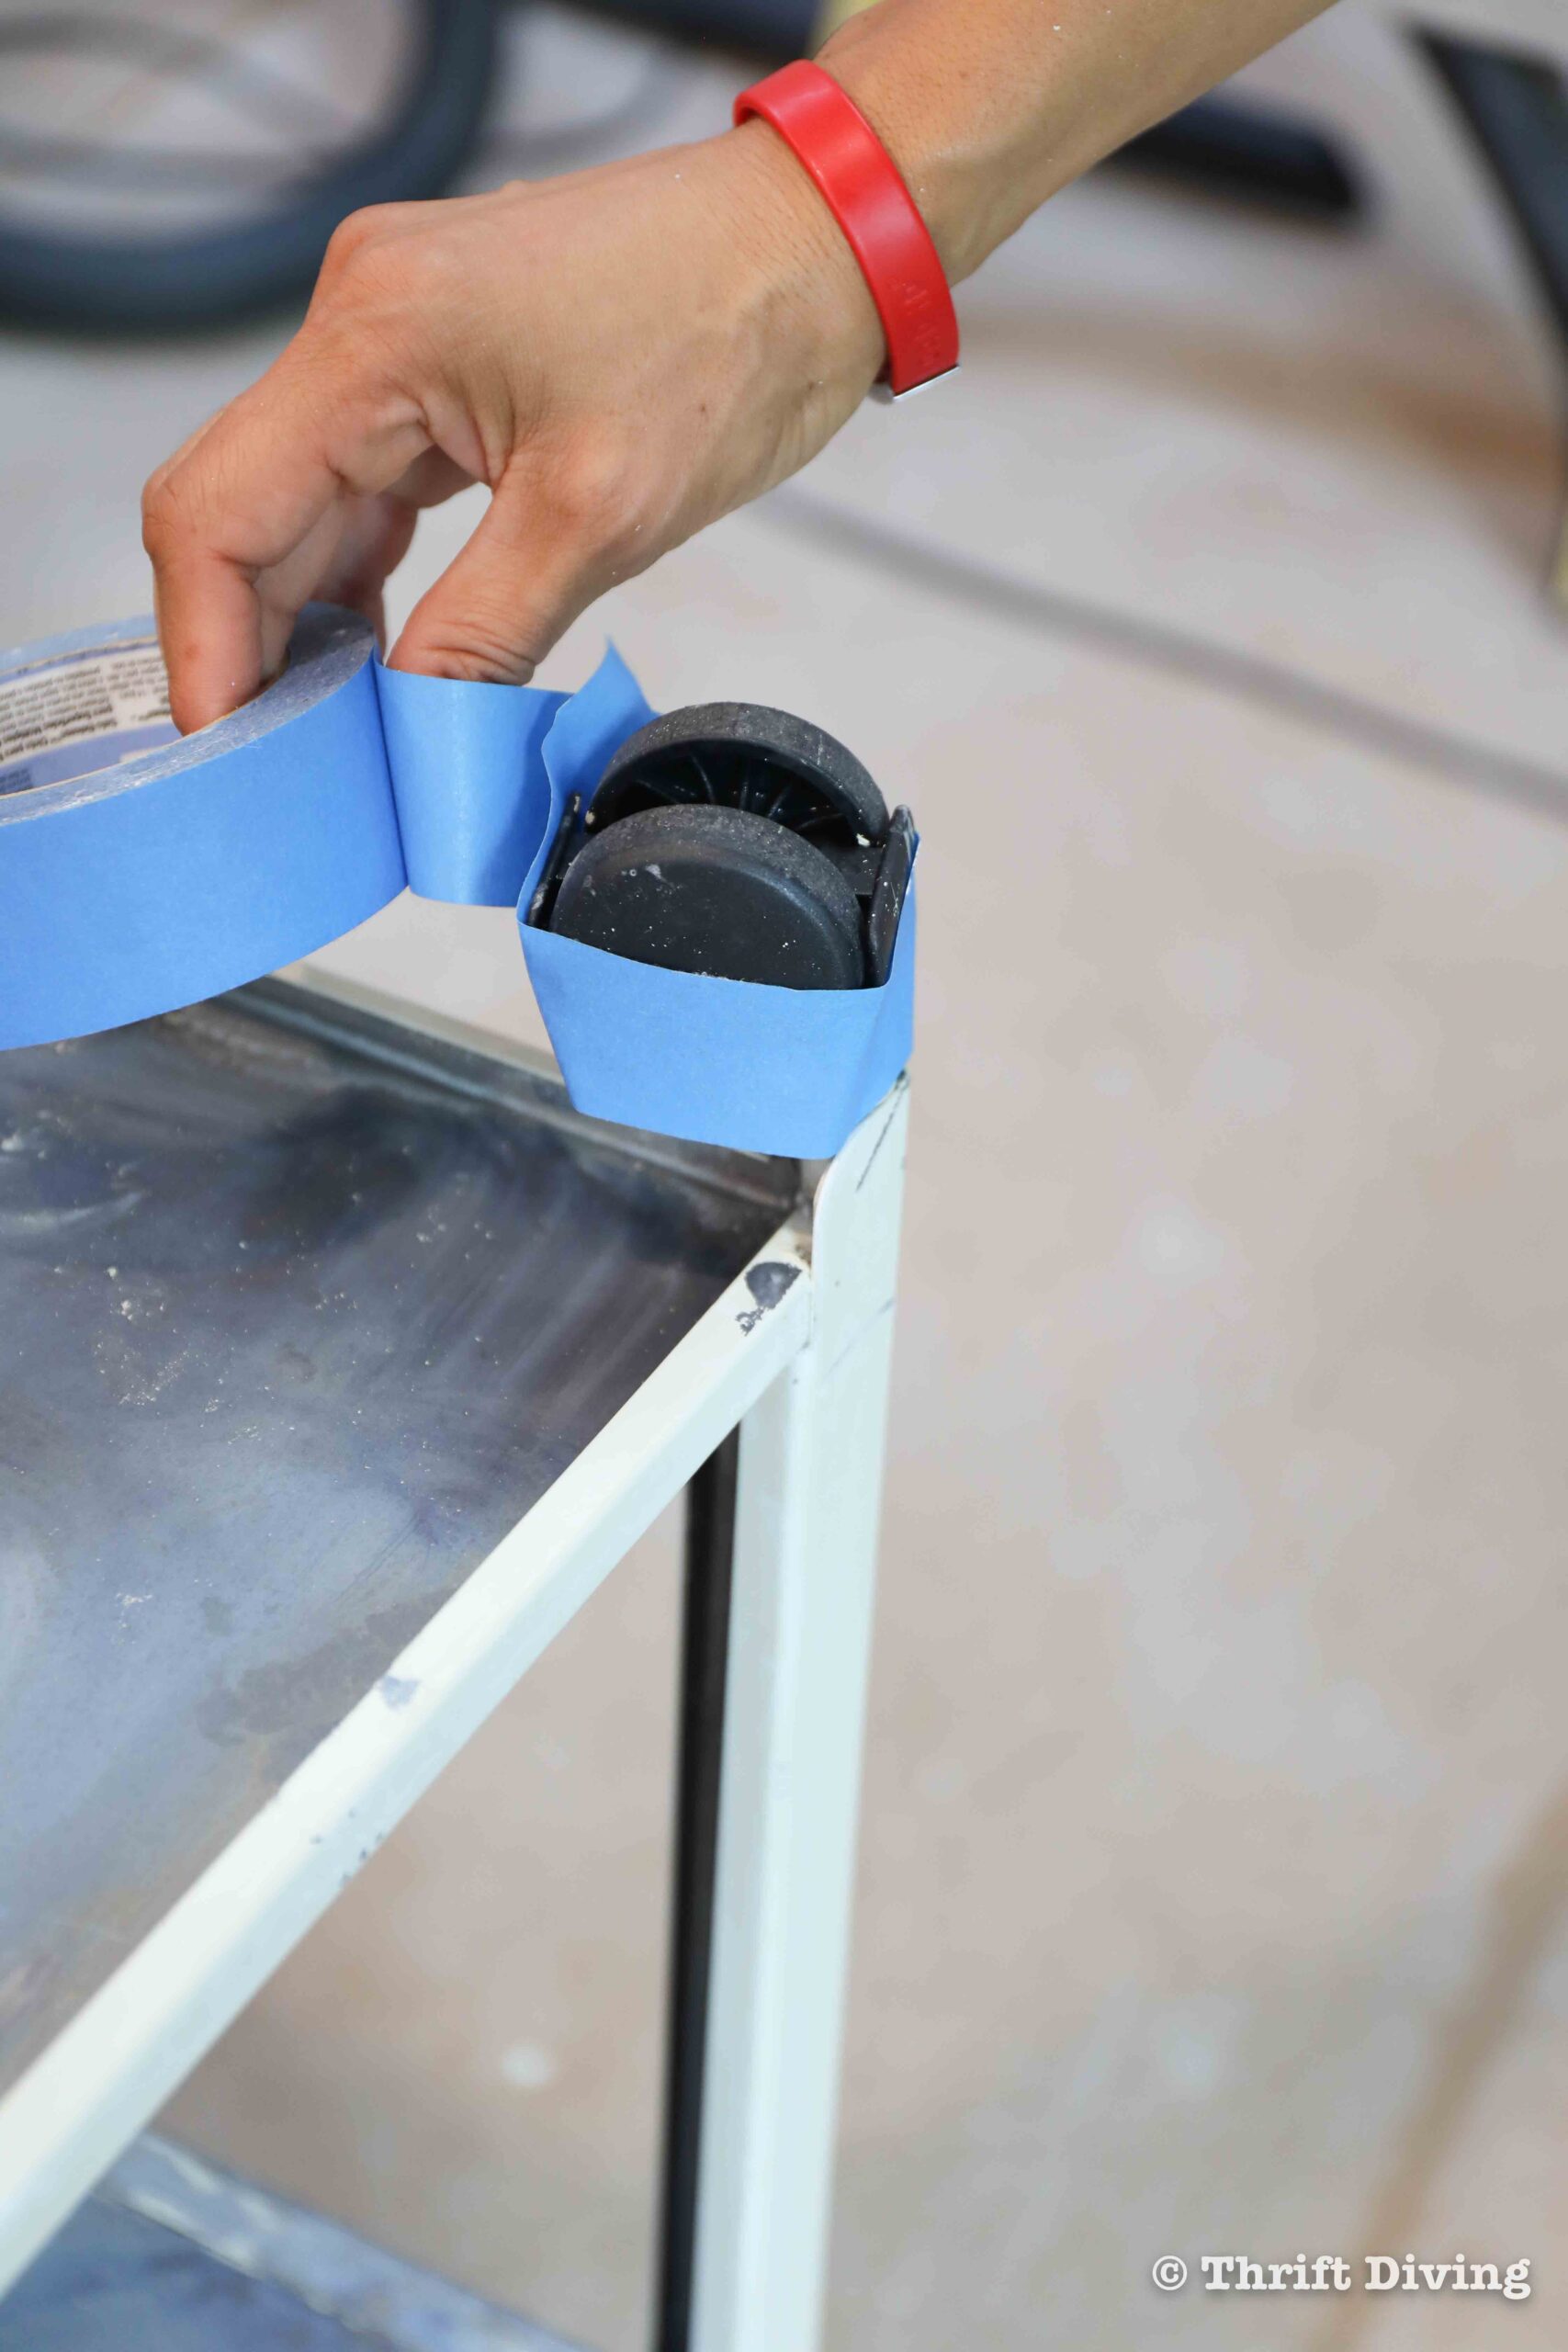 How to Paint a Metal File Cabinet - Tape off areas to protect it from spray paint. - Thrift Diving